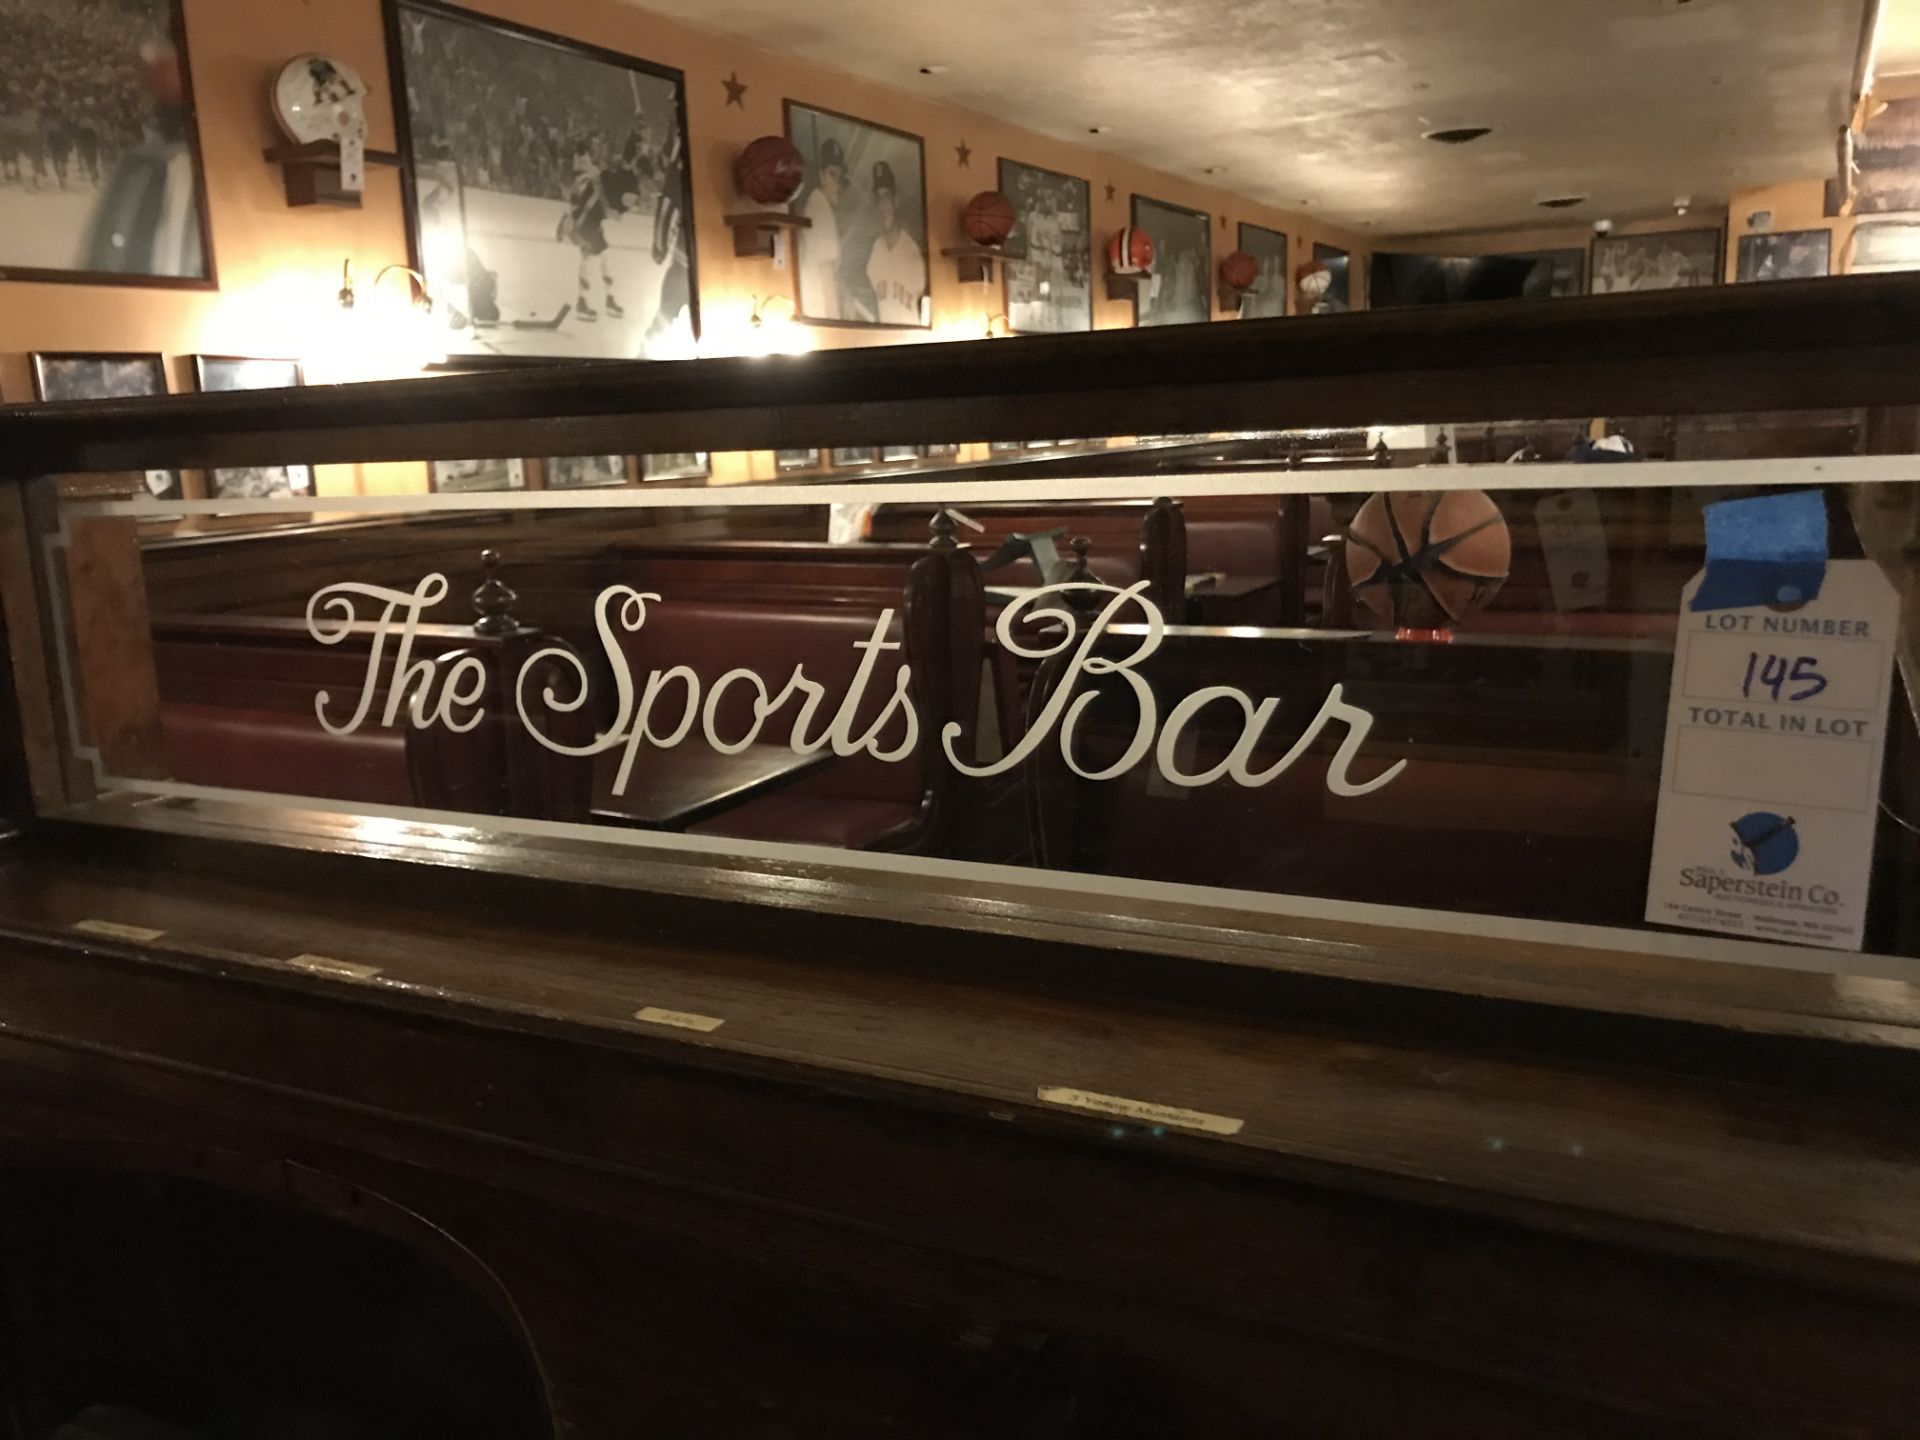 THE SPORTS BAR Etched Glass Panel Approx. 41 5/16" x 9"